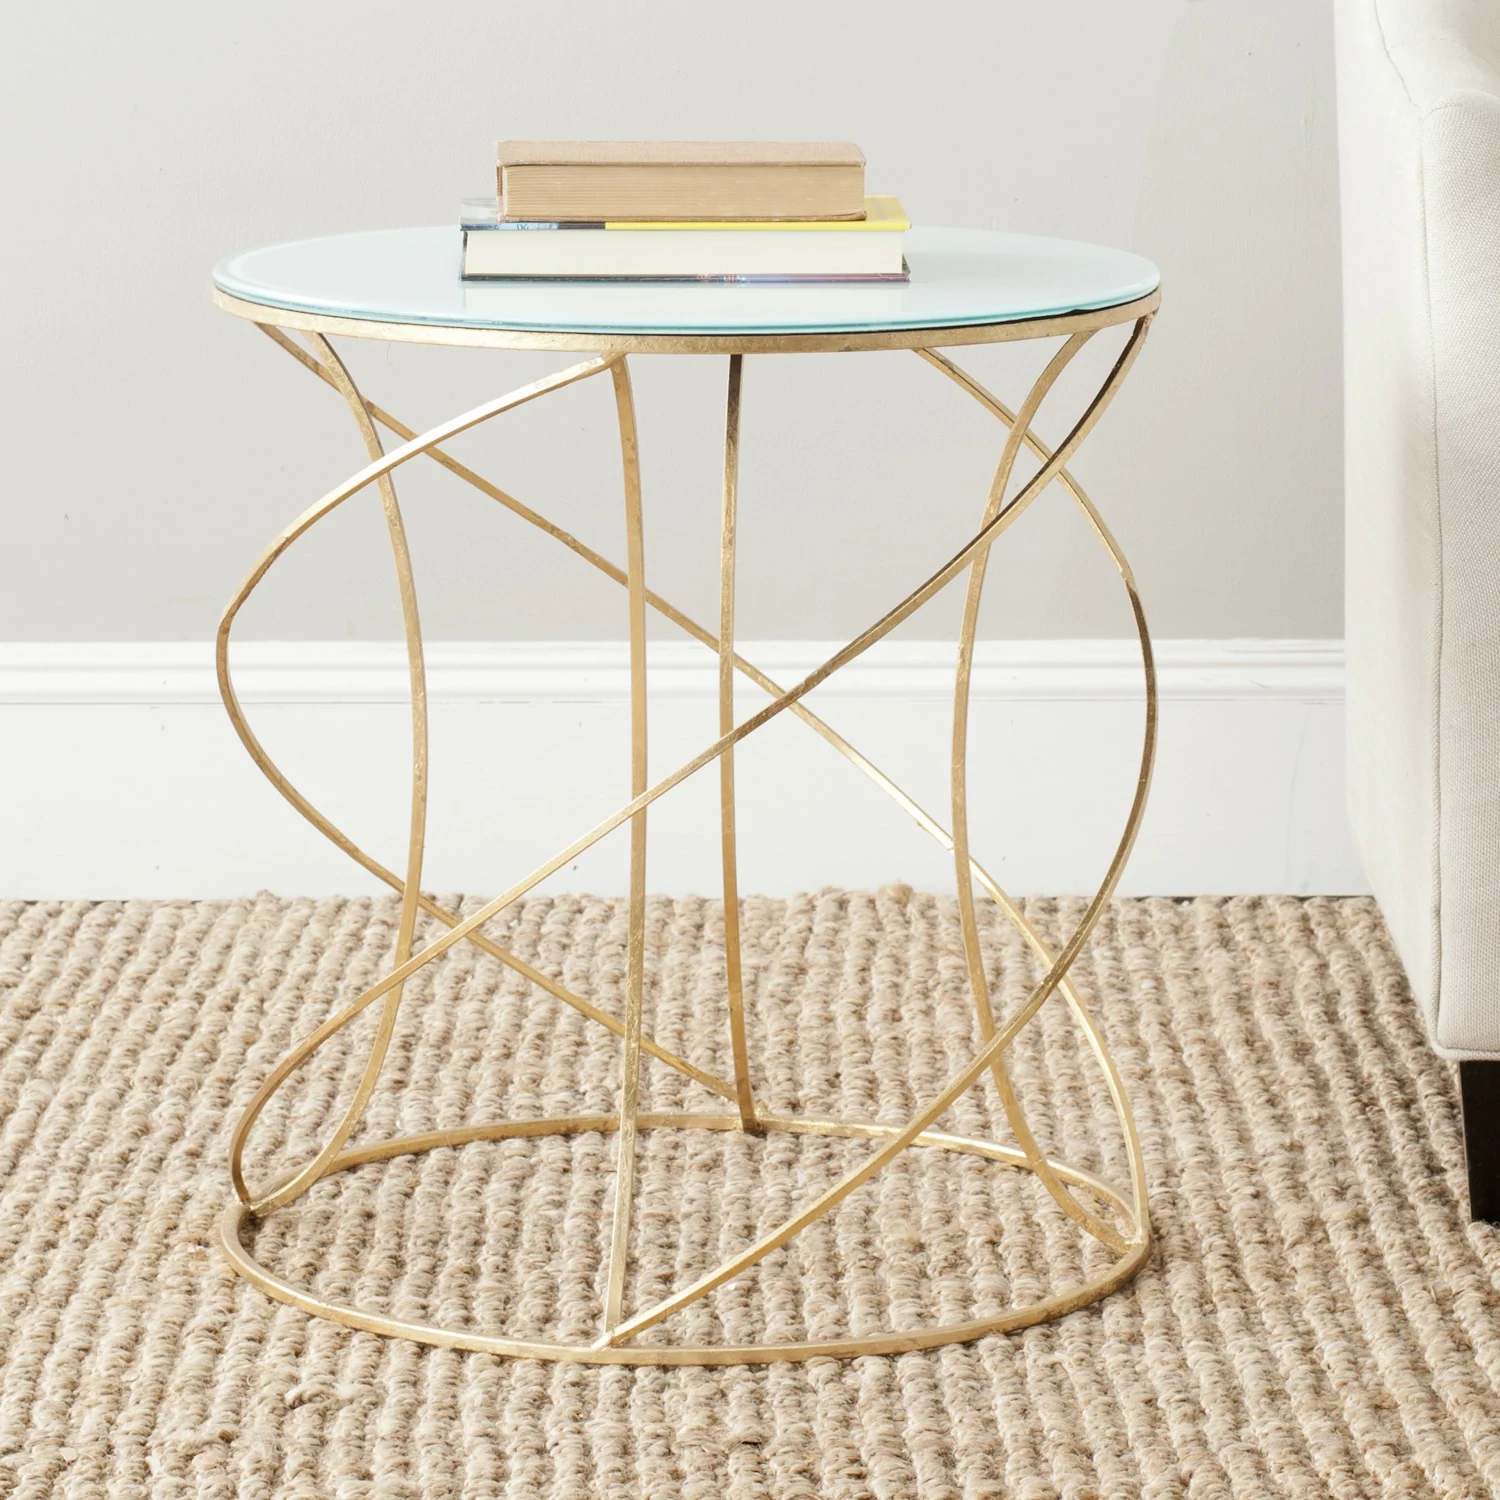 safavieh treasures cagney gold white top accent table marble red end timber bunnings small wooden kitchen mirrored cube side floor threshold transitions metal home computer desks